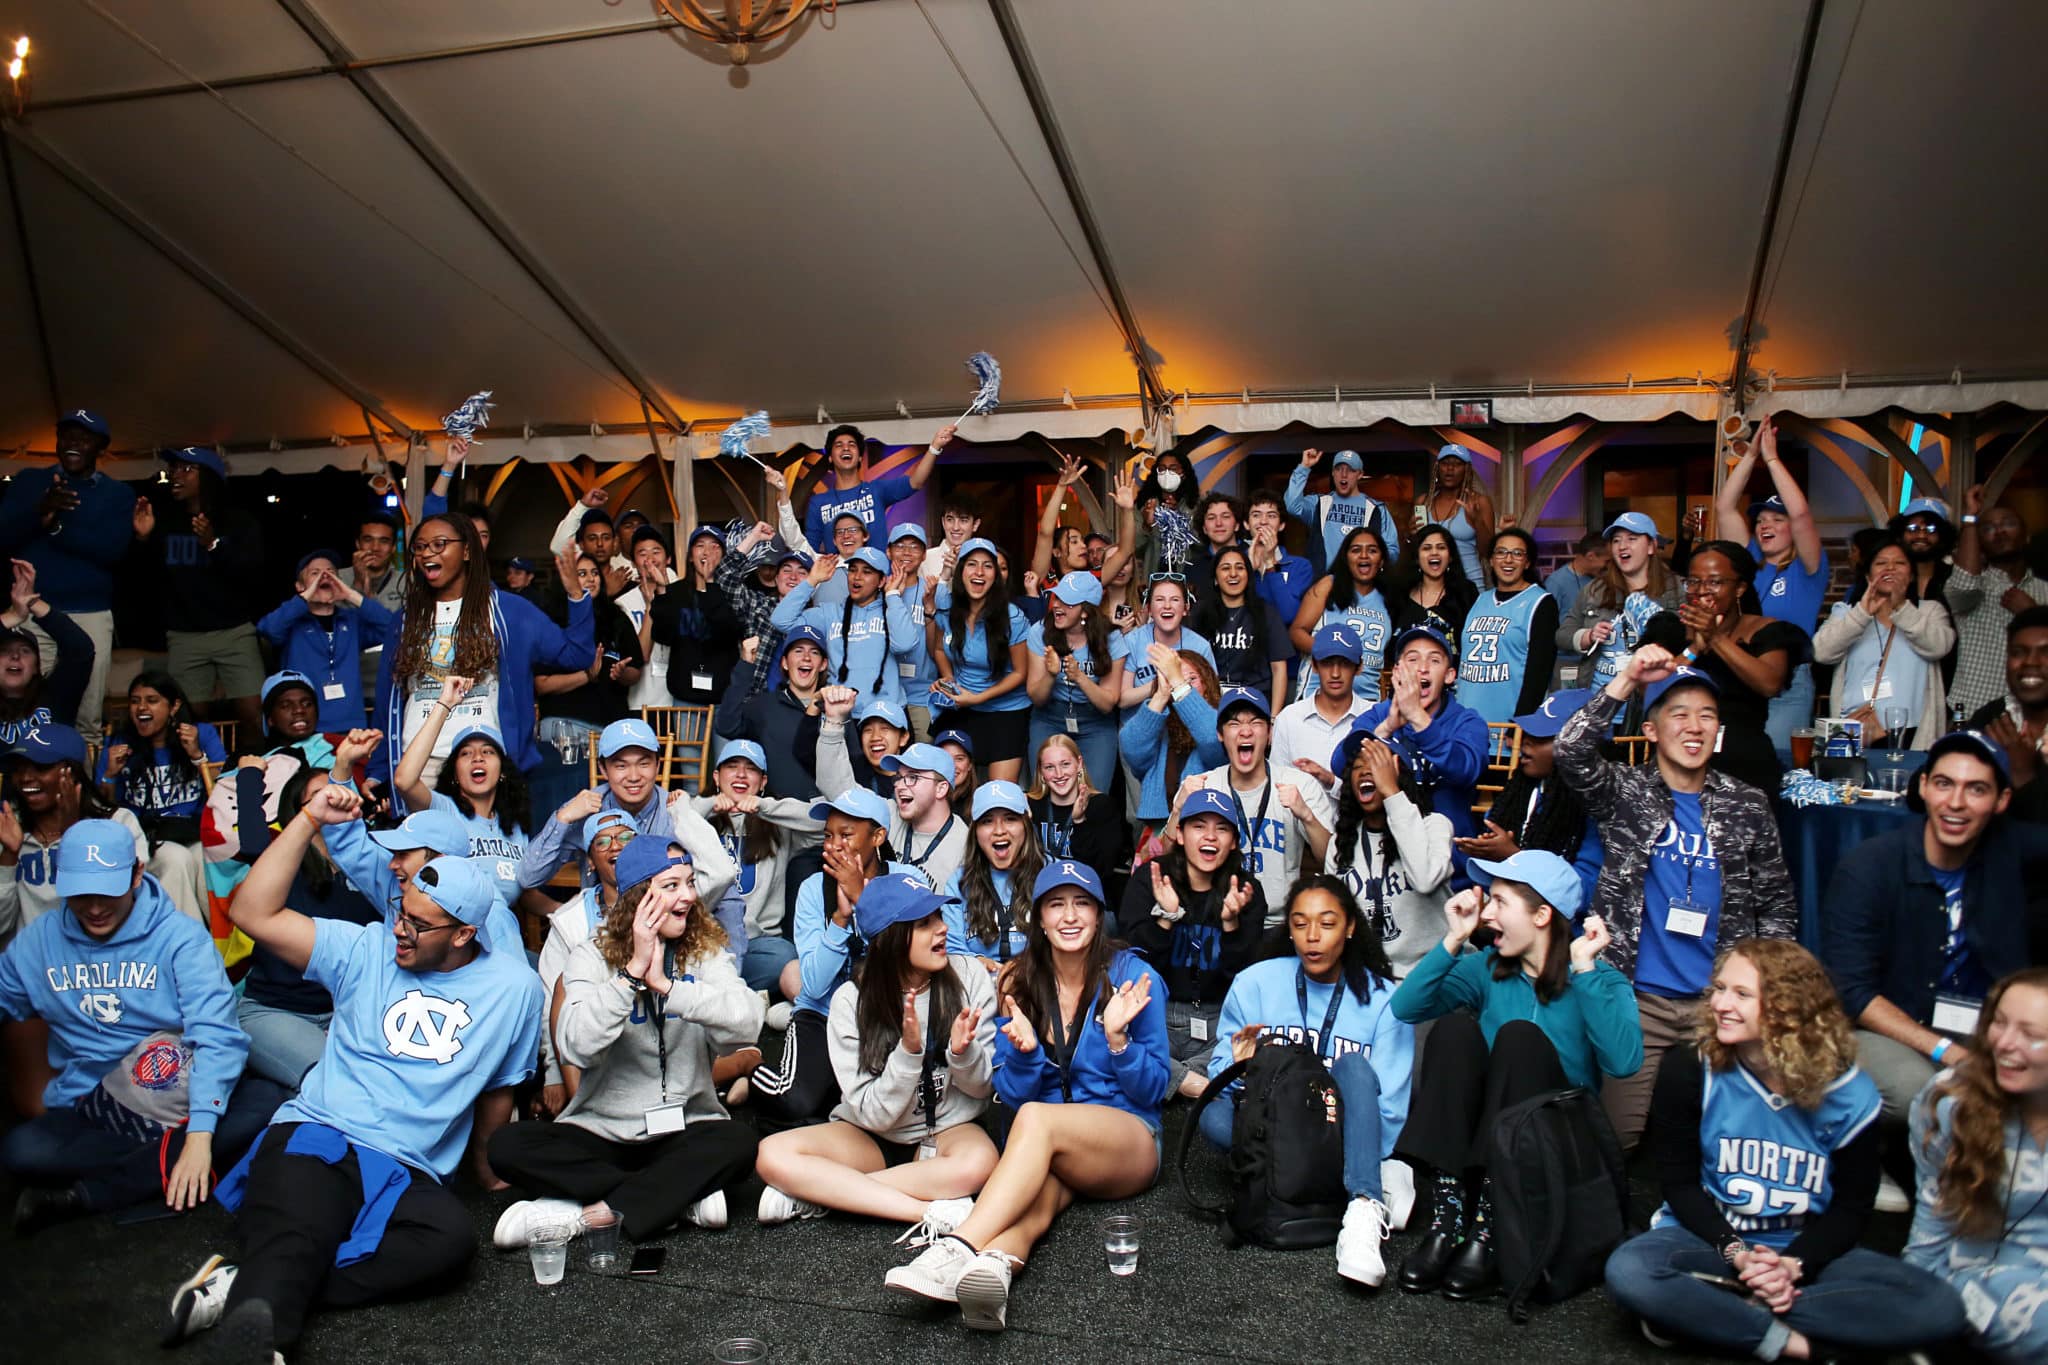 The Robertson Scholars Leadership Program held a watch party as UNC took on Duke in a NCAA Final Four basketball game, Saturday, April 2, 2022, at the Karsh Alumni Center, on the campus of Duke University in Durham, N.C.

© Copyright 2022 Veasey Conway, All Rights Reserved